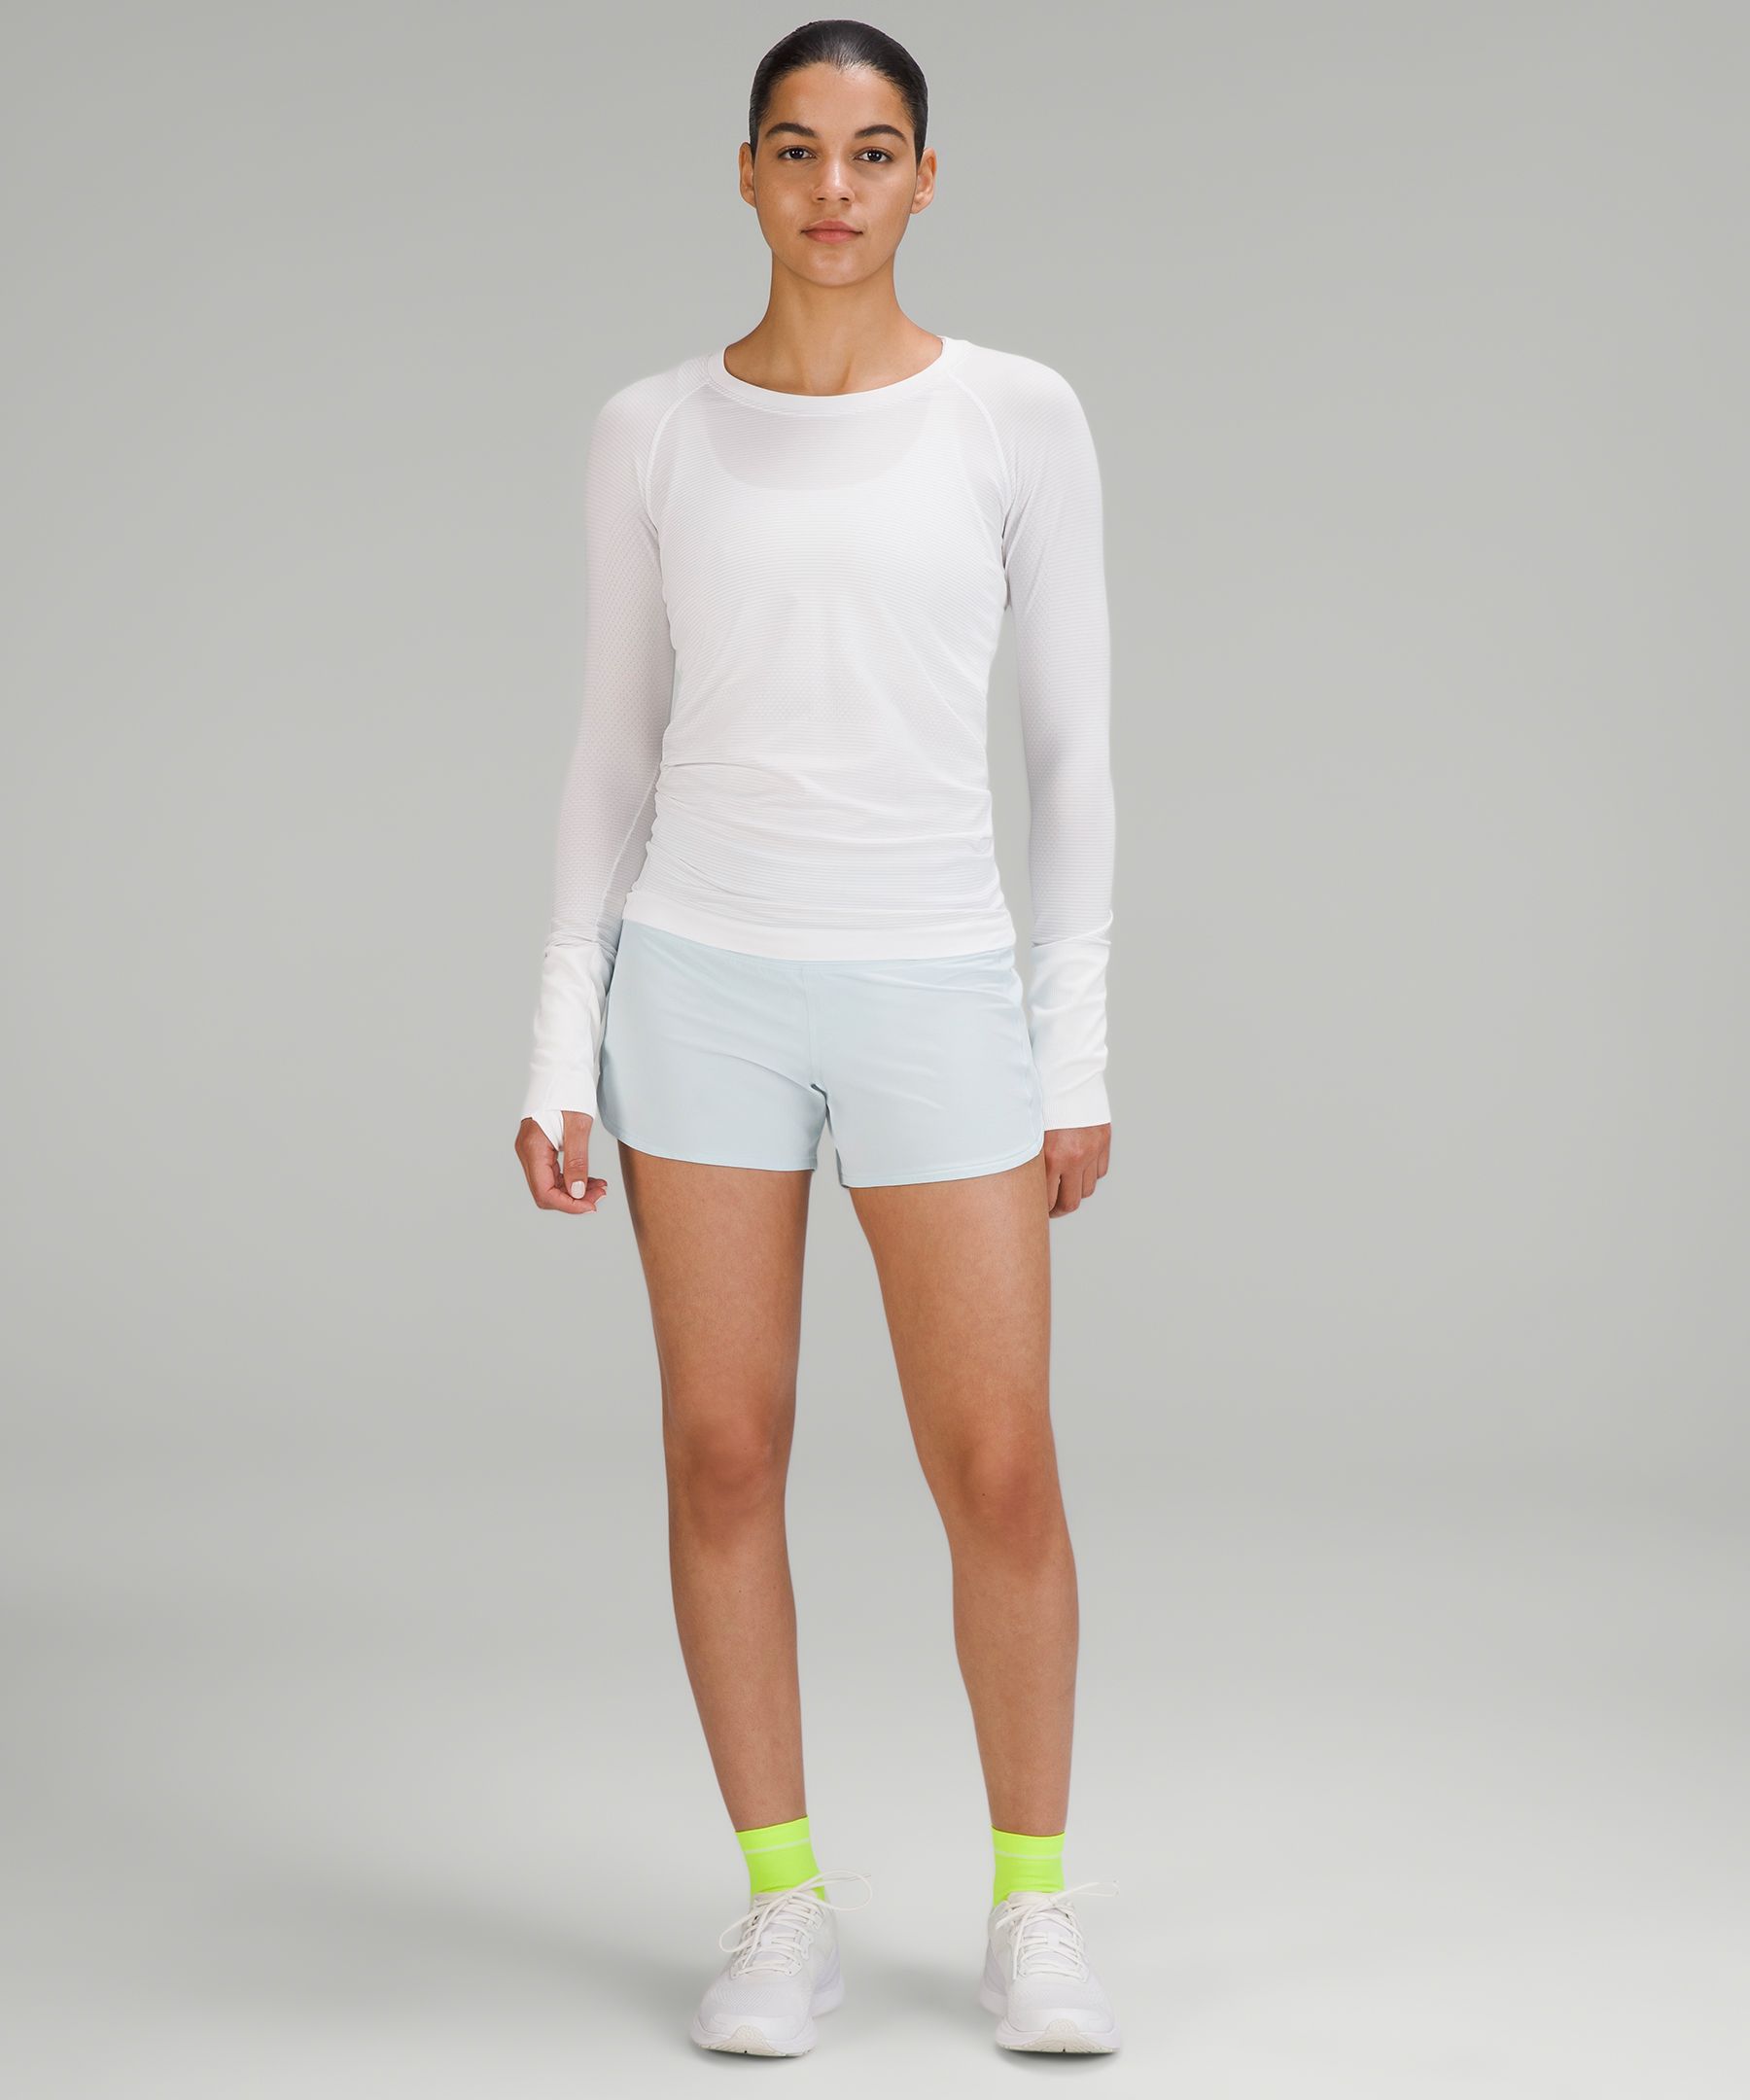 Lululemon Speed Up Shorts Blue Size 4 - $55 (19% Off Retail) - From haven